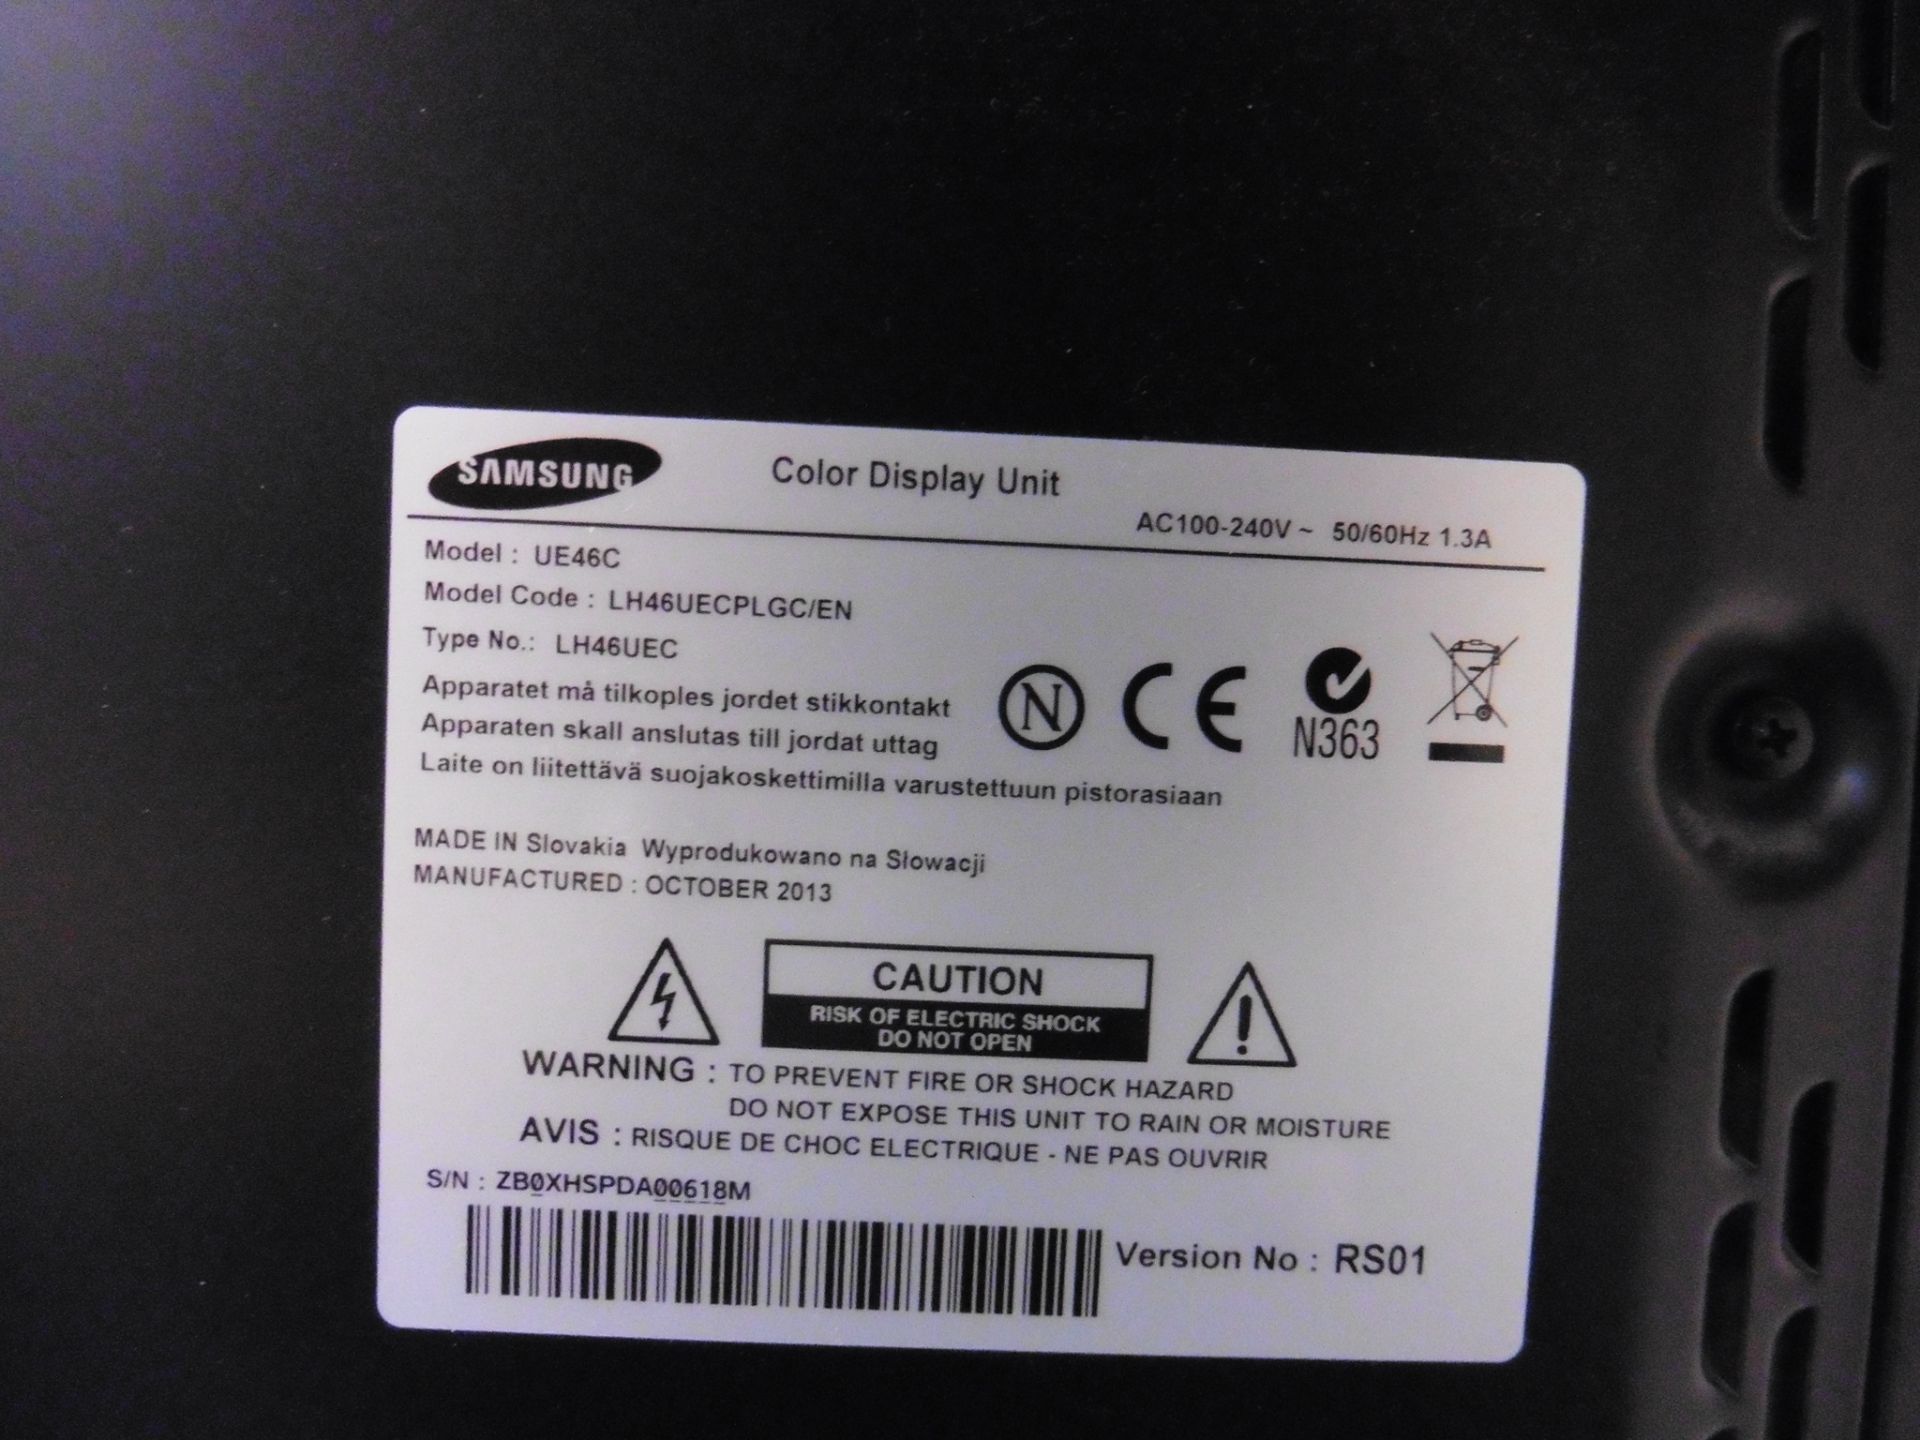 Samsung model UE46C colour display screen with remote (manufactured 2013) - Image 2 of 2